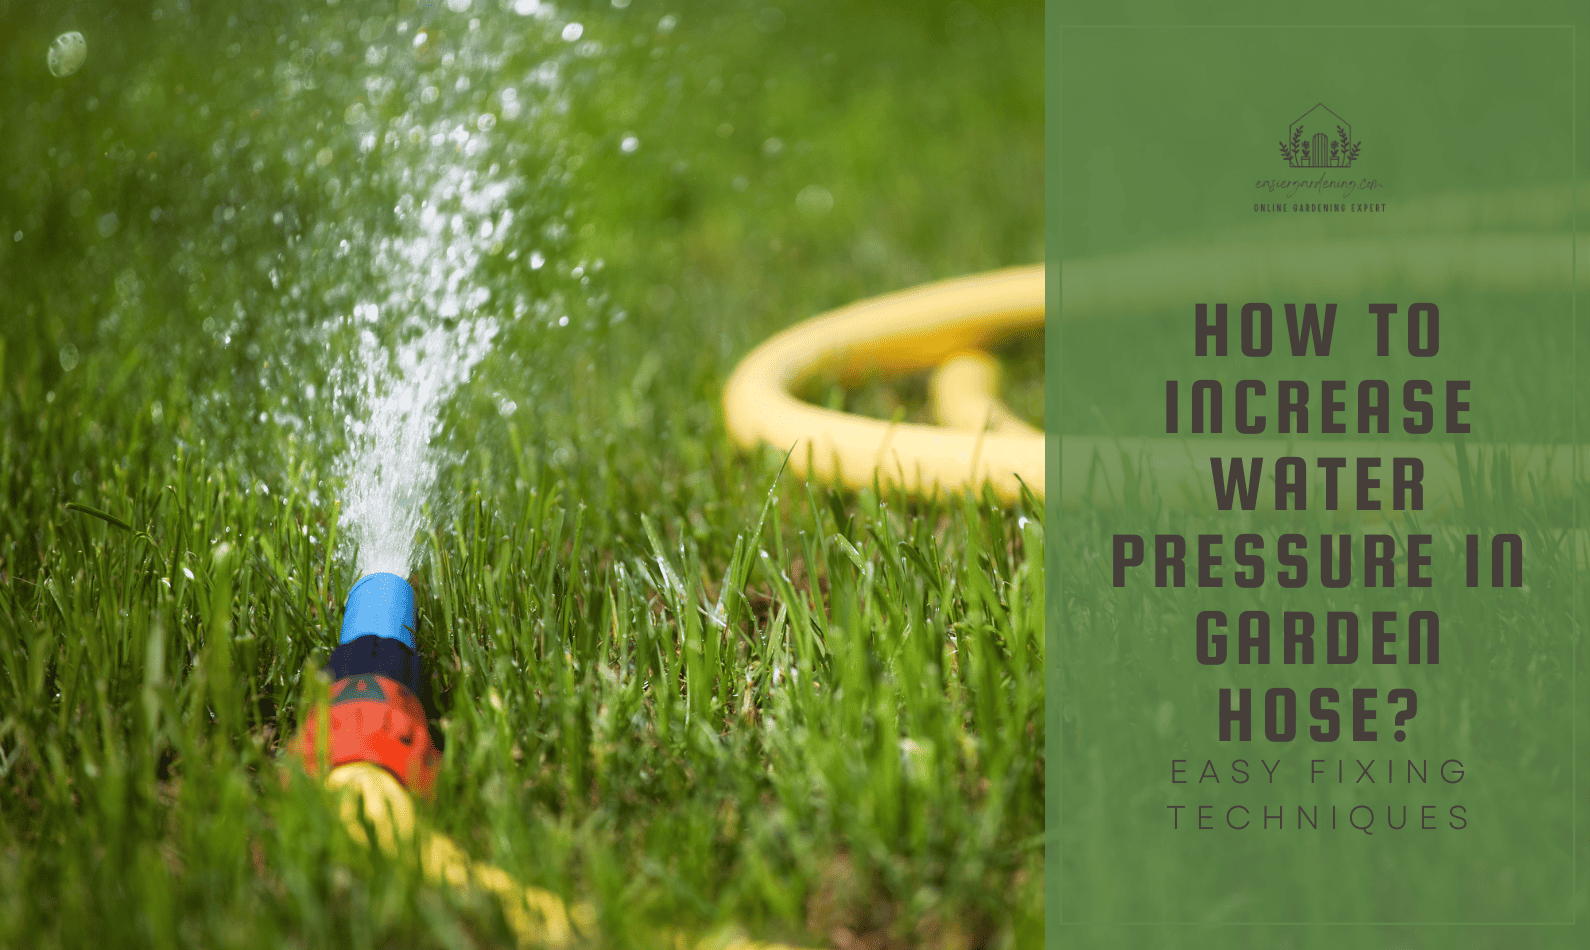 How to Increase Water Pressure in Garden Hose?